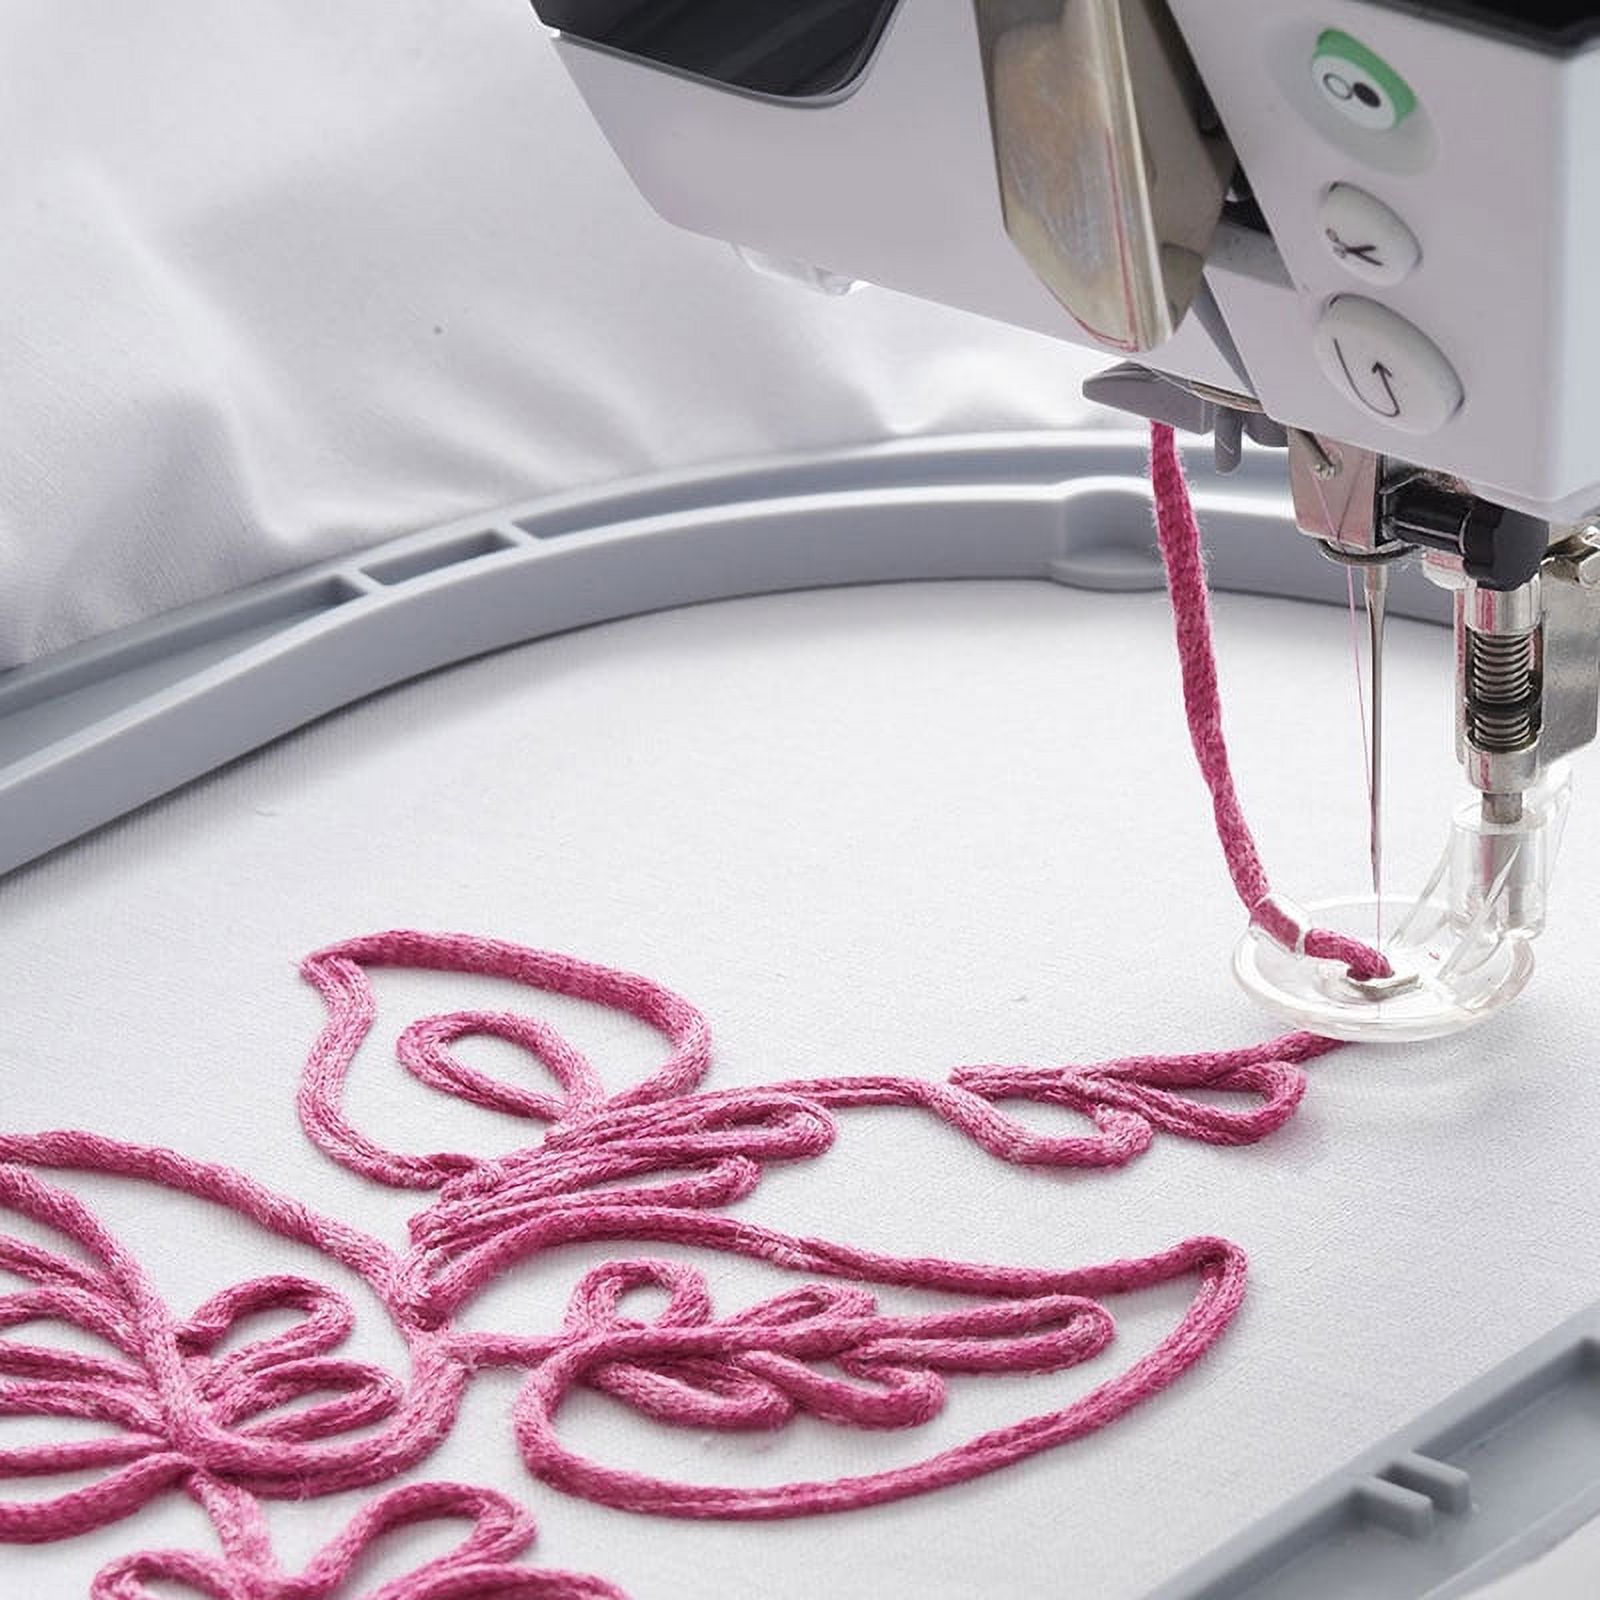 Sewing Machine Embroidery Hoop Frame Embroidery Hoop Frame Set for Brother  Sewing Machine Embroidery Hoop Sewing Machine Brother Sewing Machine Embroidery  Hoop Frame Embroidery Hoop 3-piece Set 